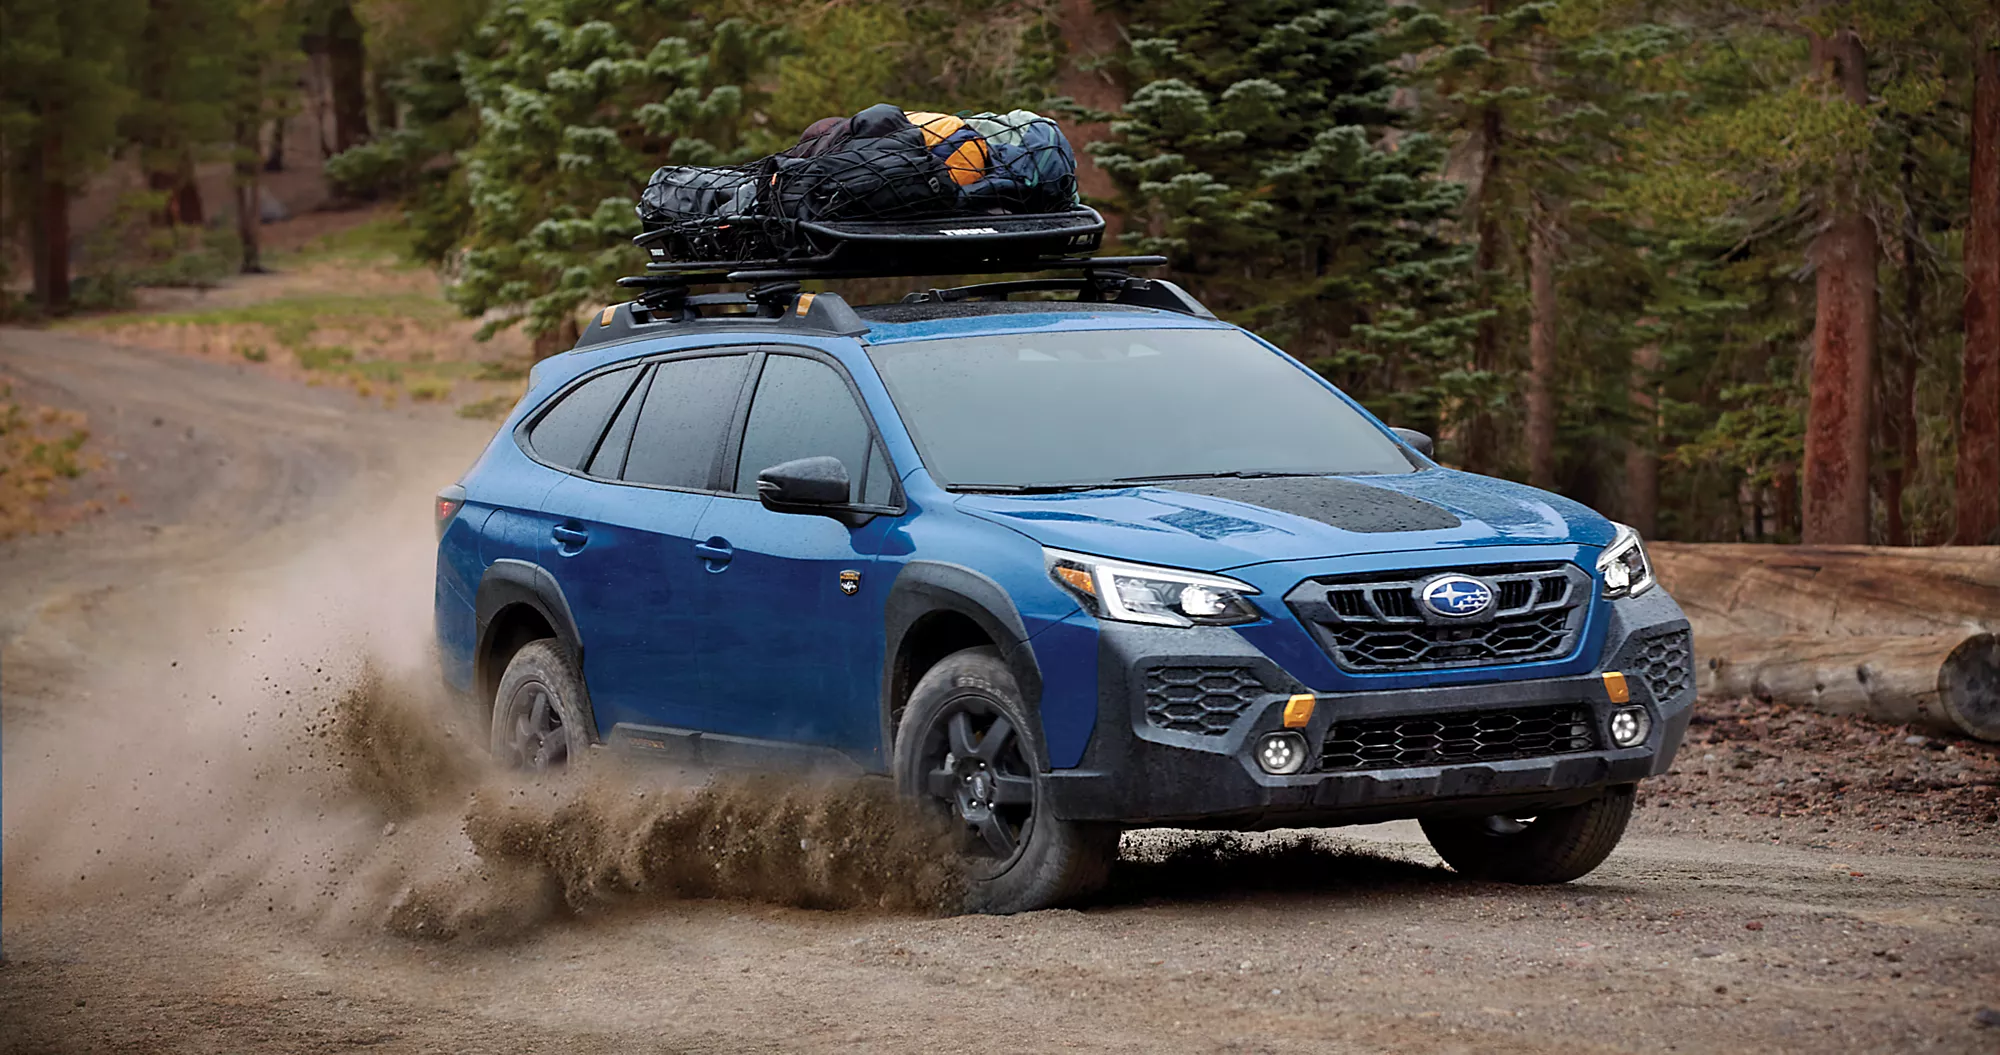  Cosmic Blue Pearl Wilderness outback edition off roading aggressively on a dirt road